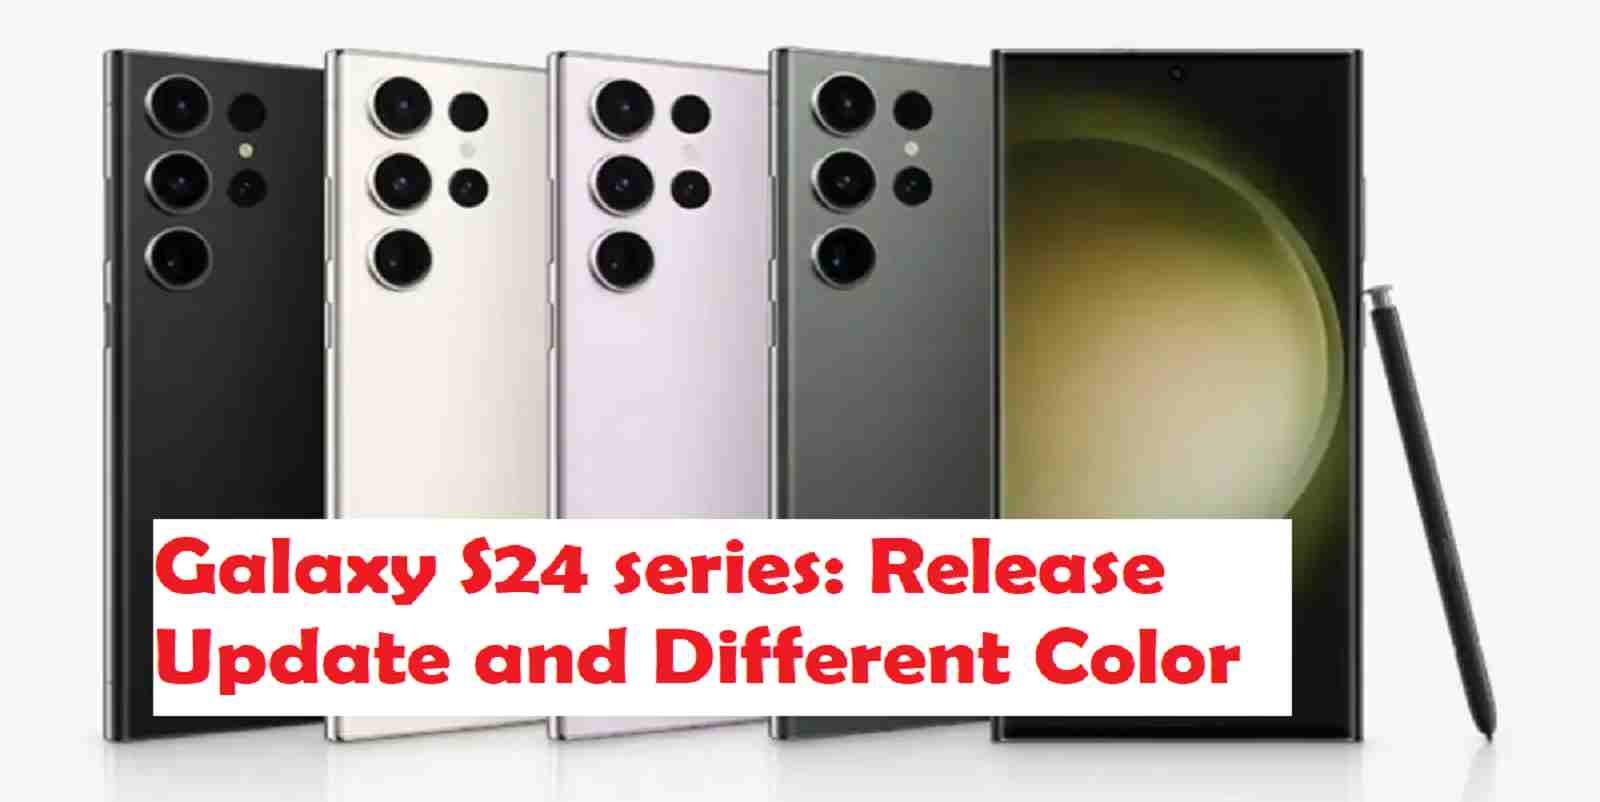 Galaxy S24 series: Release Update and Different Color